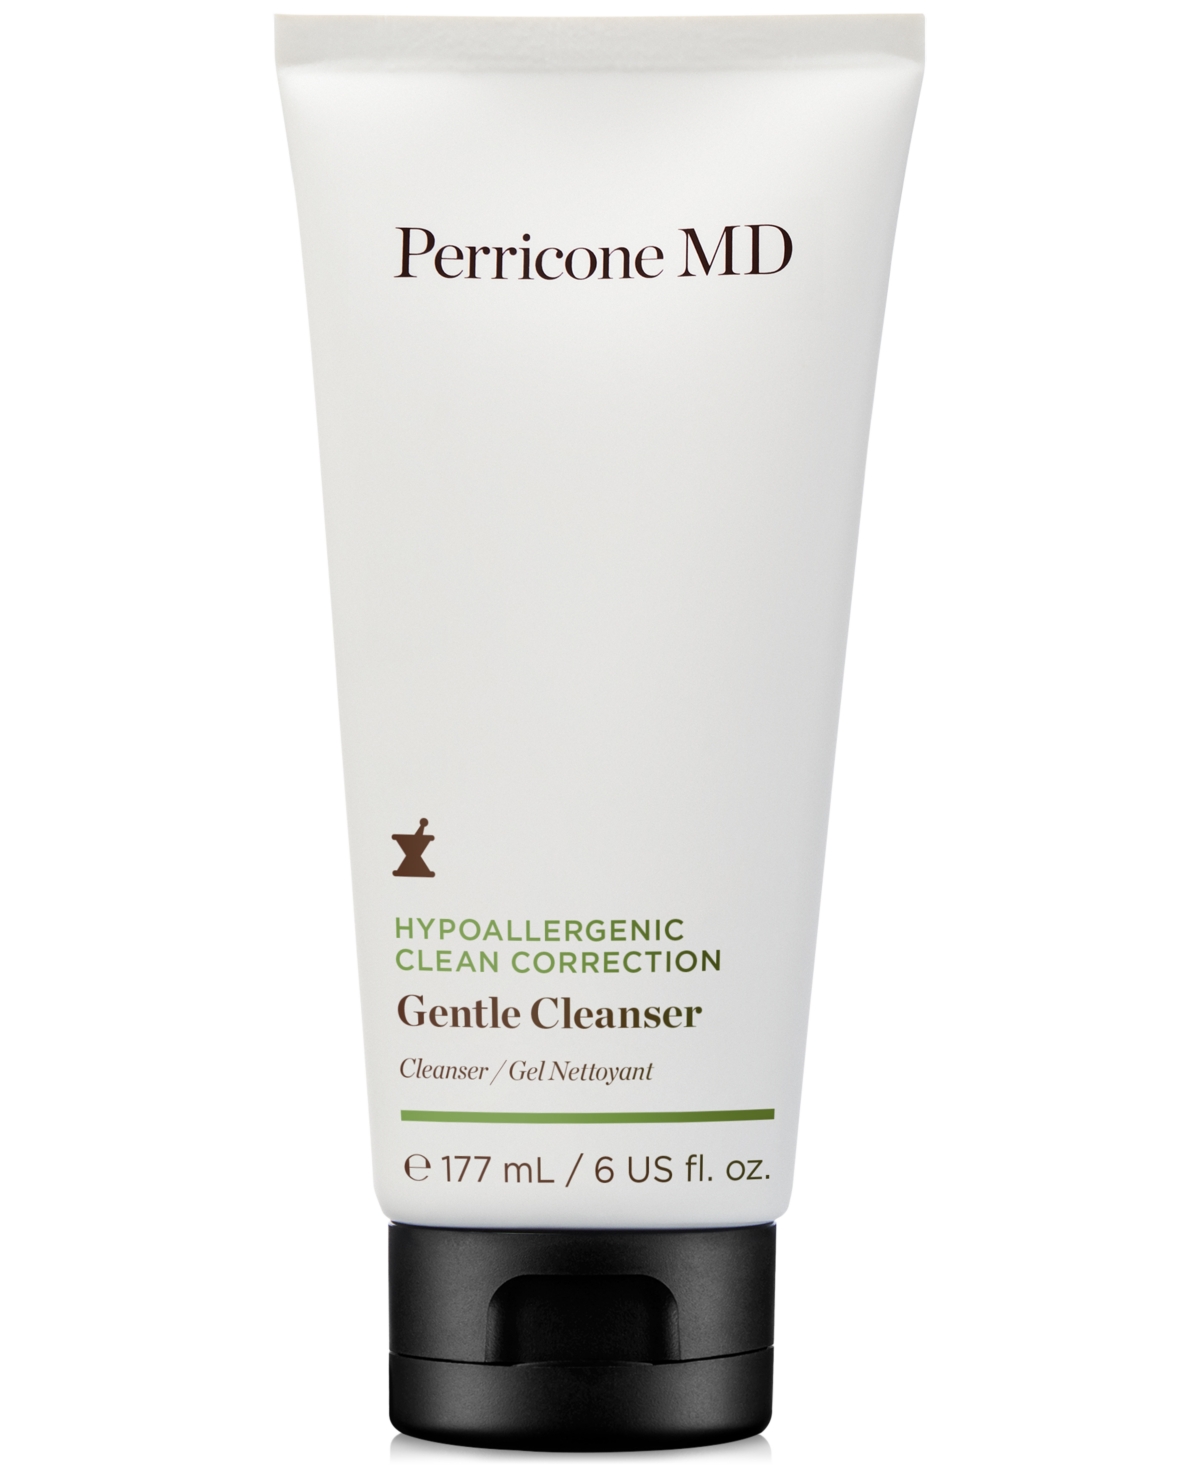 Perricone Md Hypoallergenic Clean Correction Gentle Cleanser, 6 Oz. In No Color